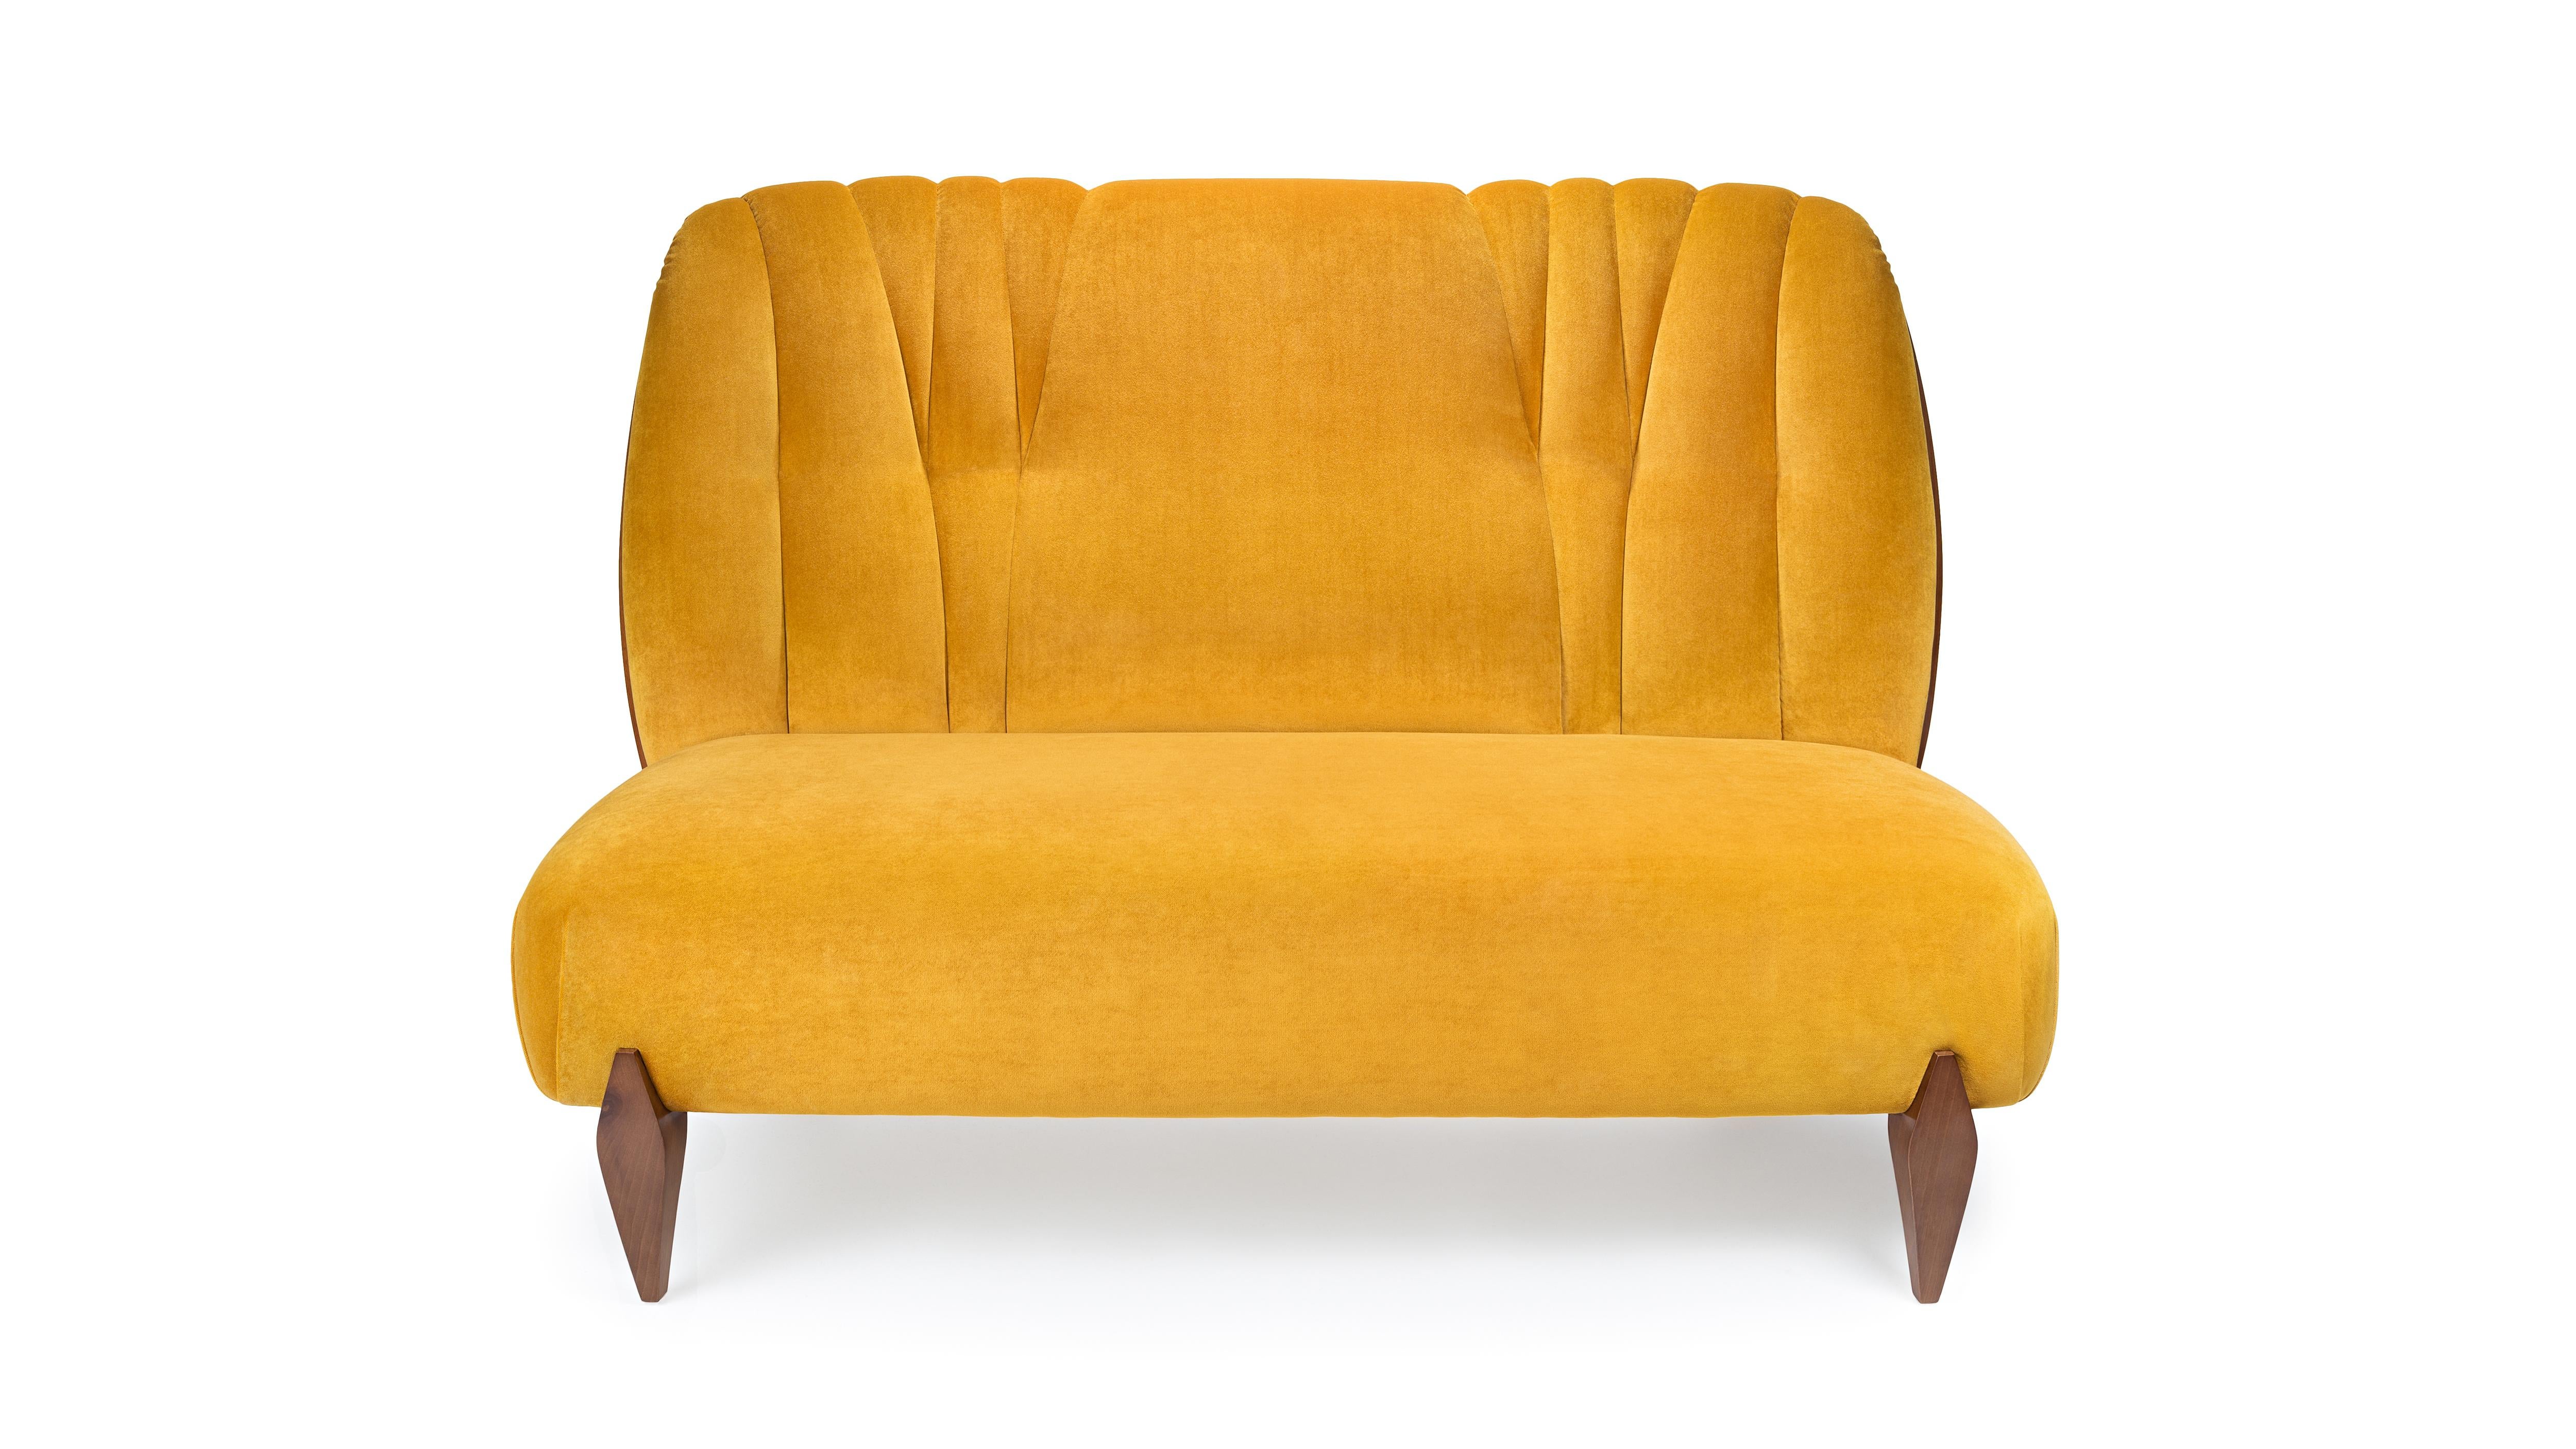 Na Pali 2 Seat Sofa by InsidherLand
Dimensions: D 82 x W 190 x H 95 cm.
Materials: Walnut, InsidherLand Bright Velvet Ref. Gold fabric.
45 kg.
Available in different fabrics.

The Na Pali sofa was designed as the original armchair, evoking the